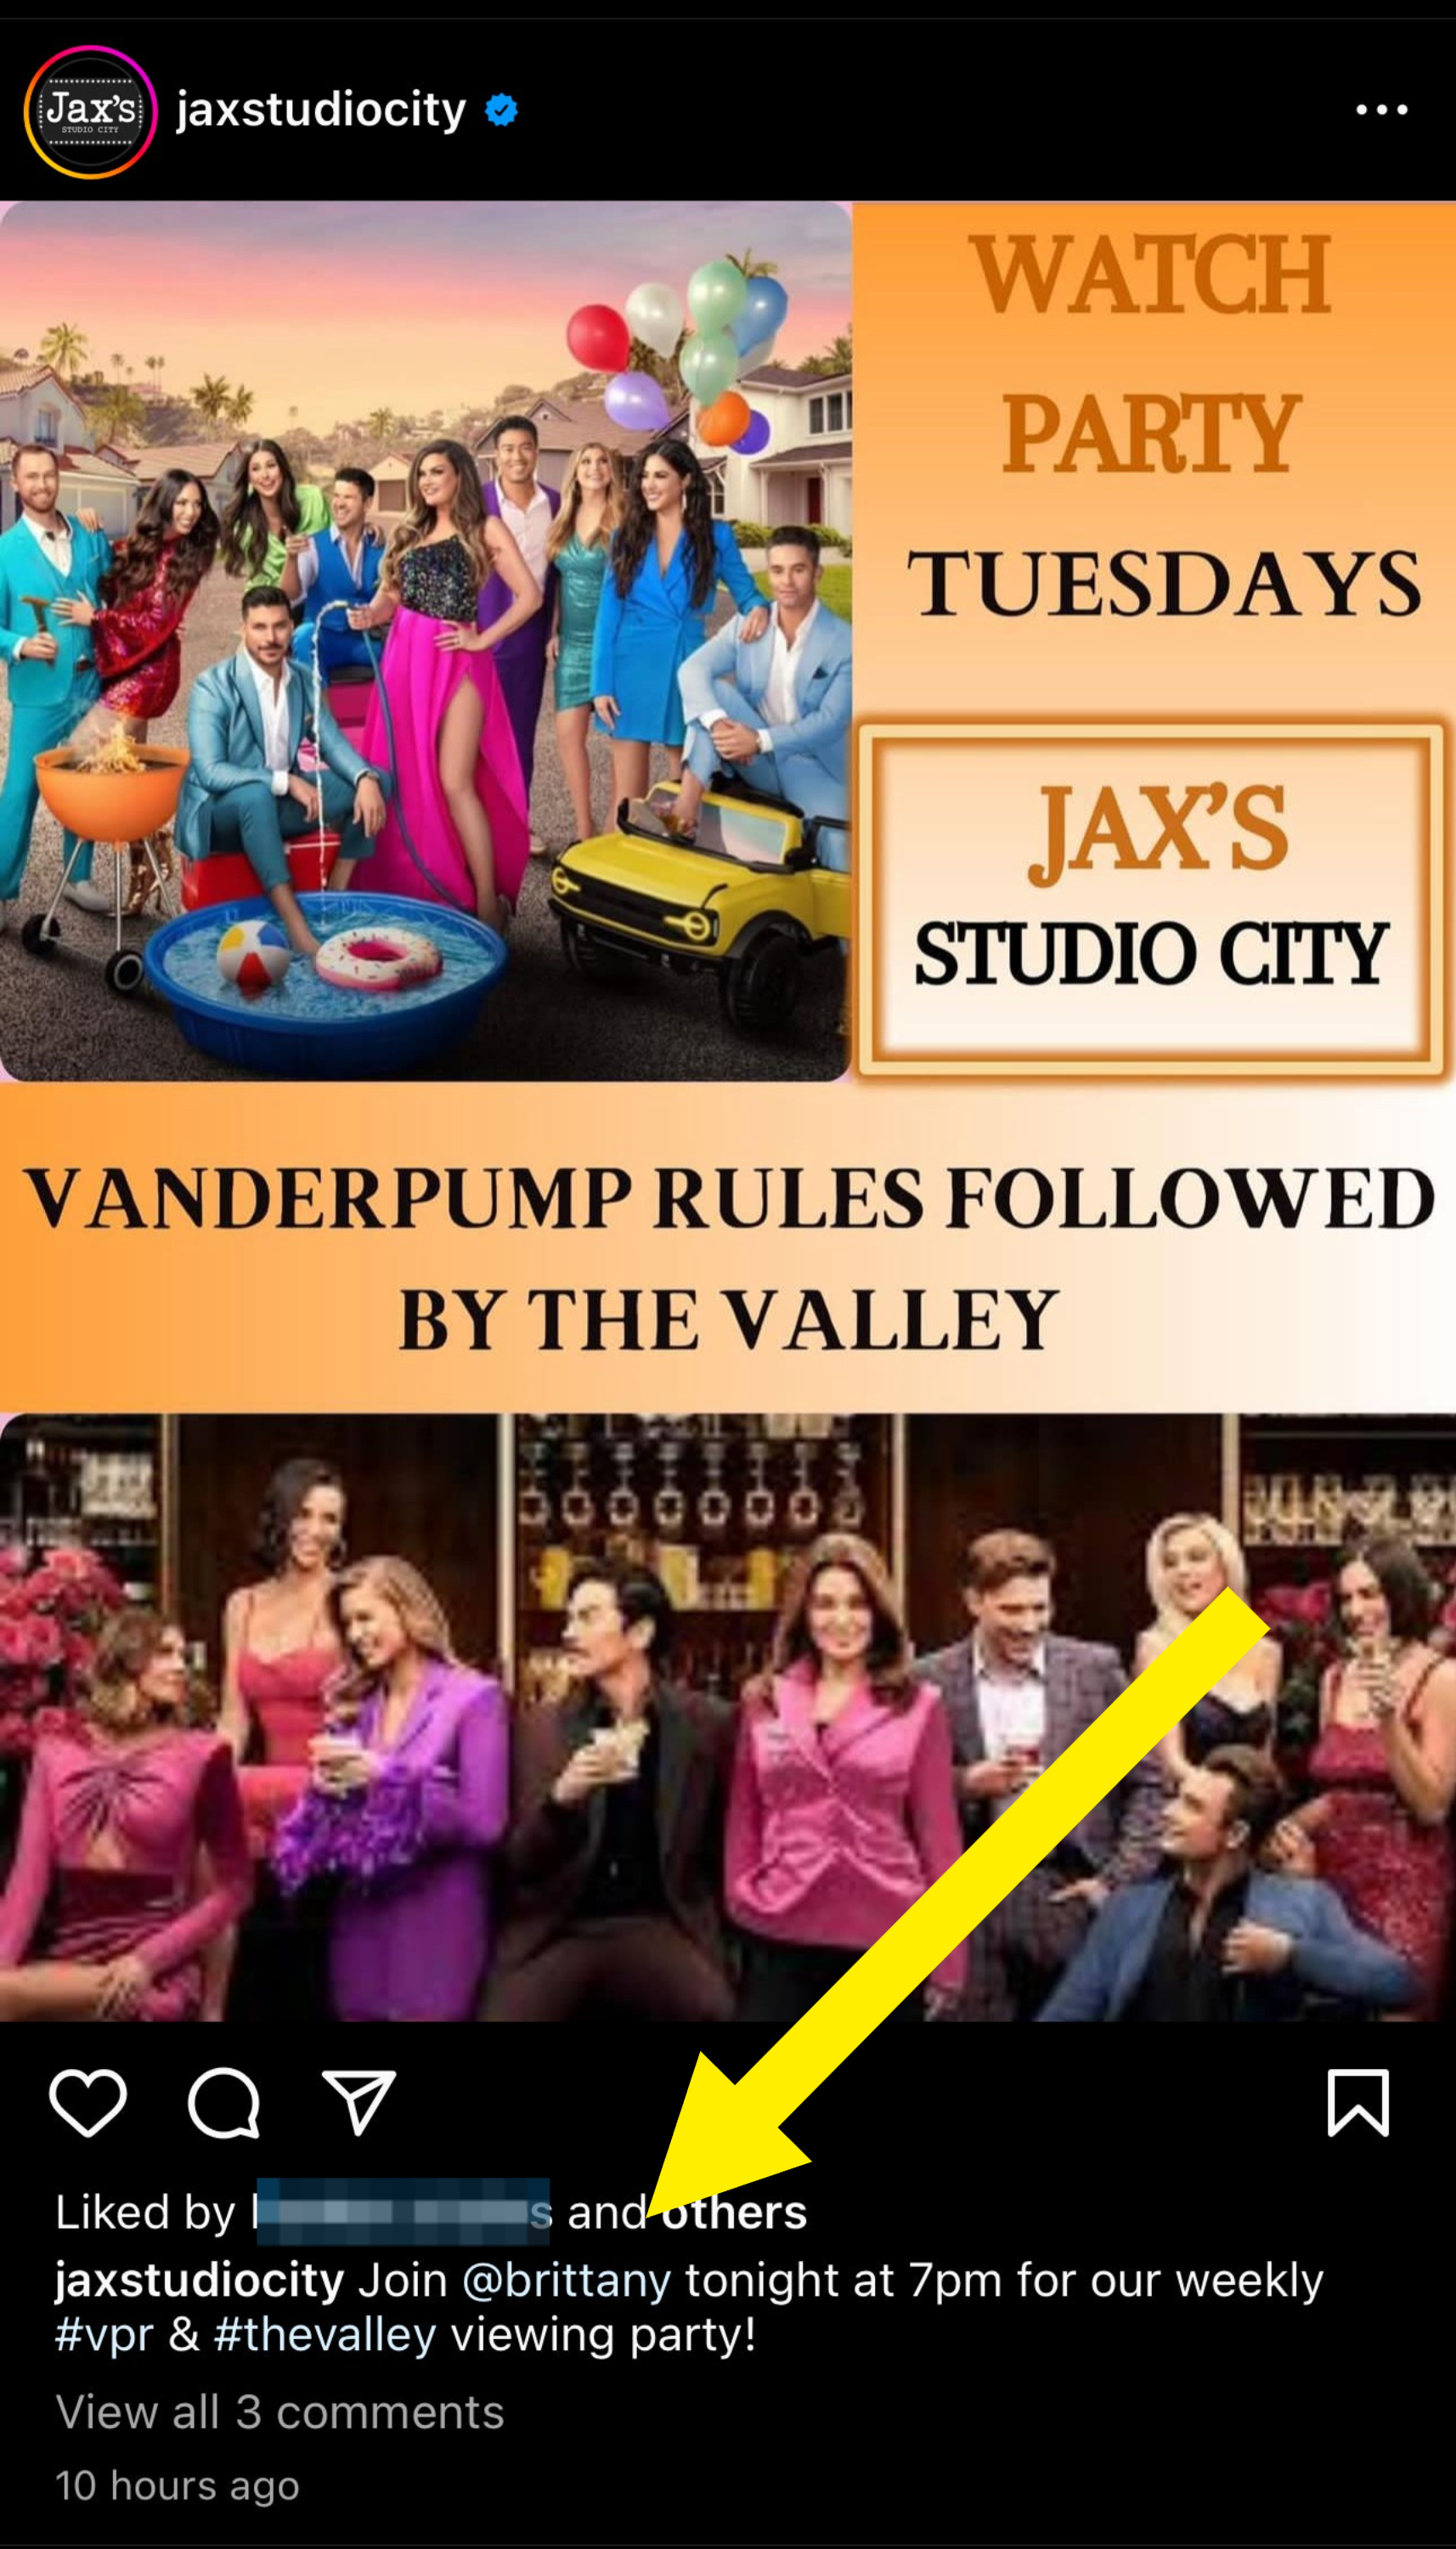 Promotional image for TV show with cast posing, text announces &quot;Watch Tuesdays,&quot; and includes Instagram post with hashtags and caption